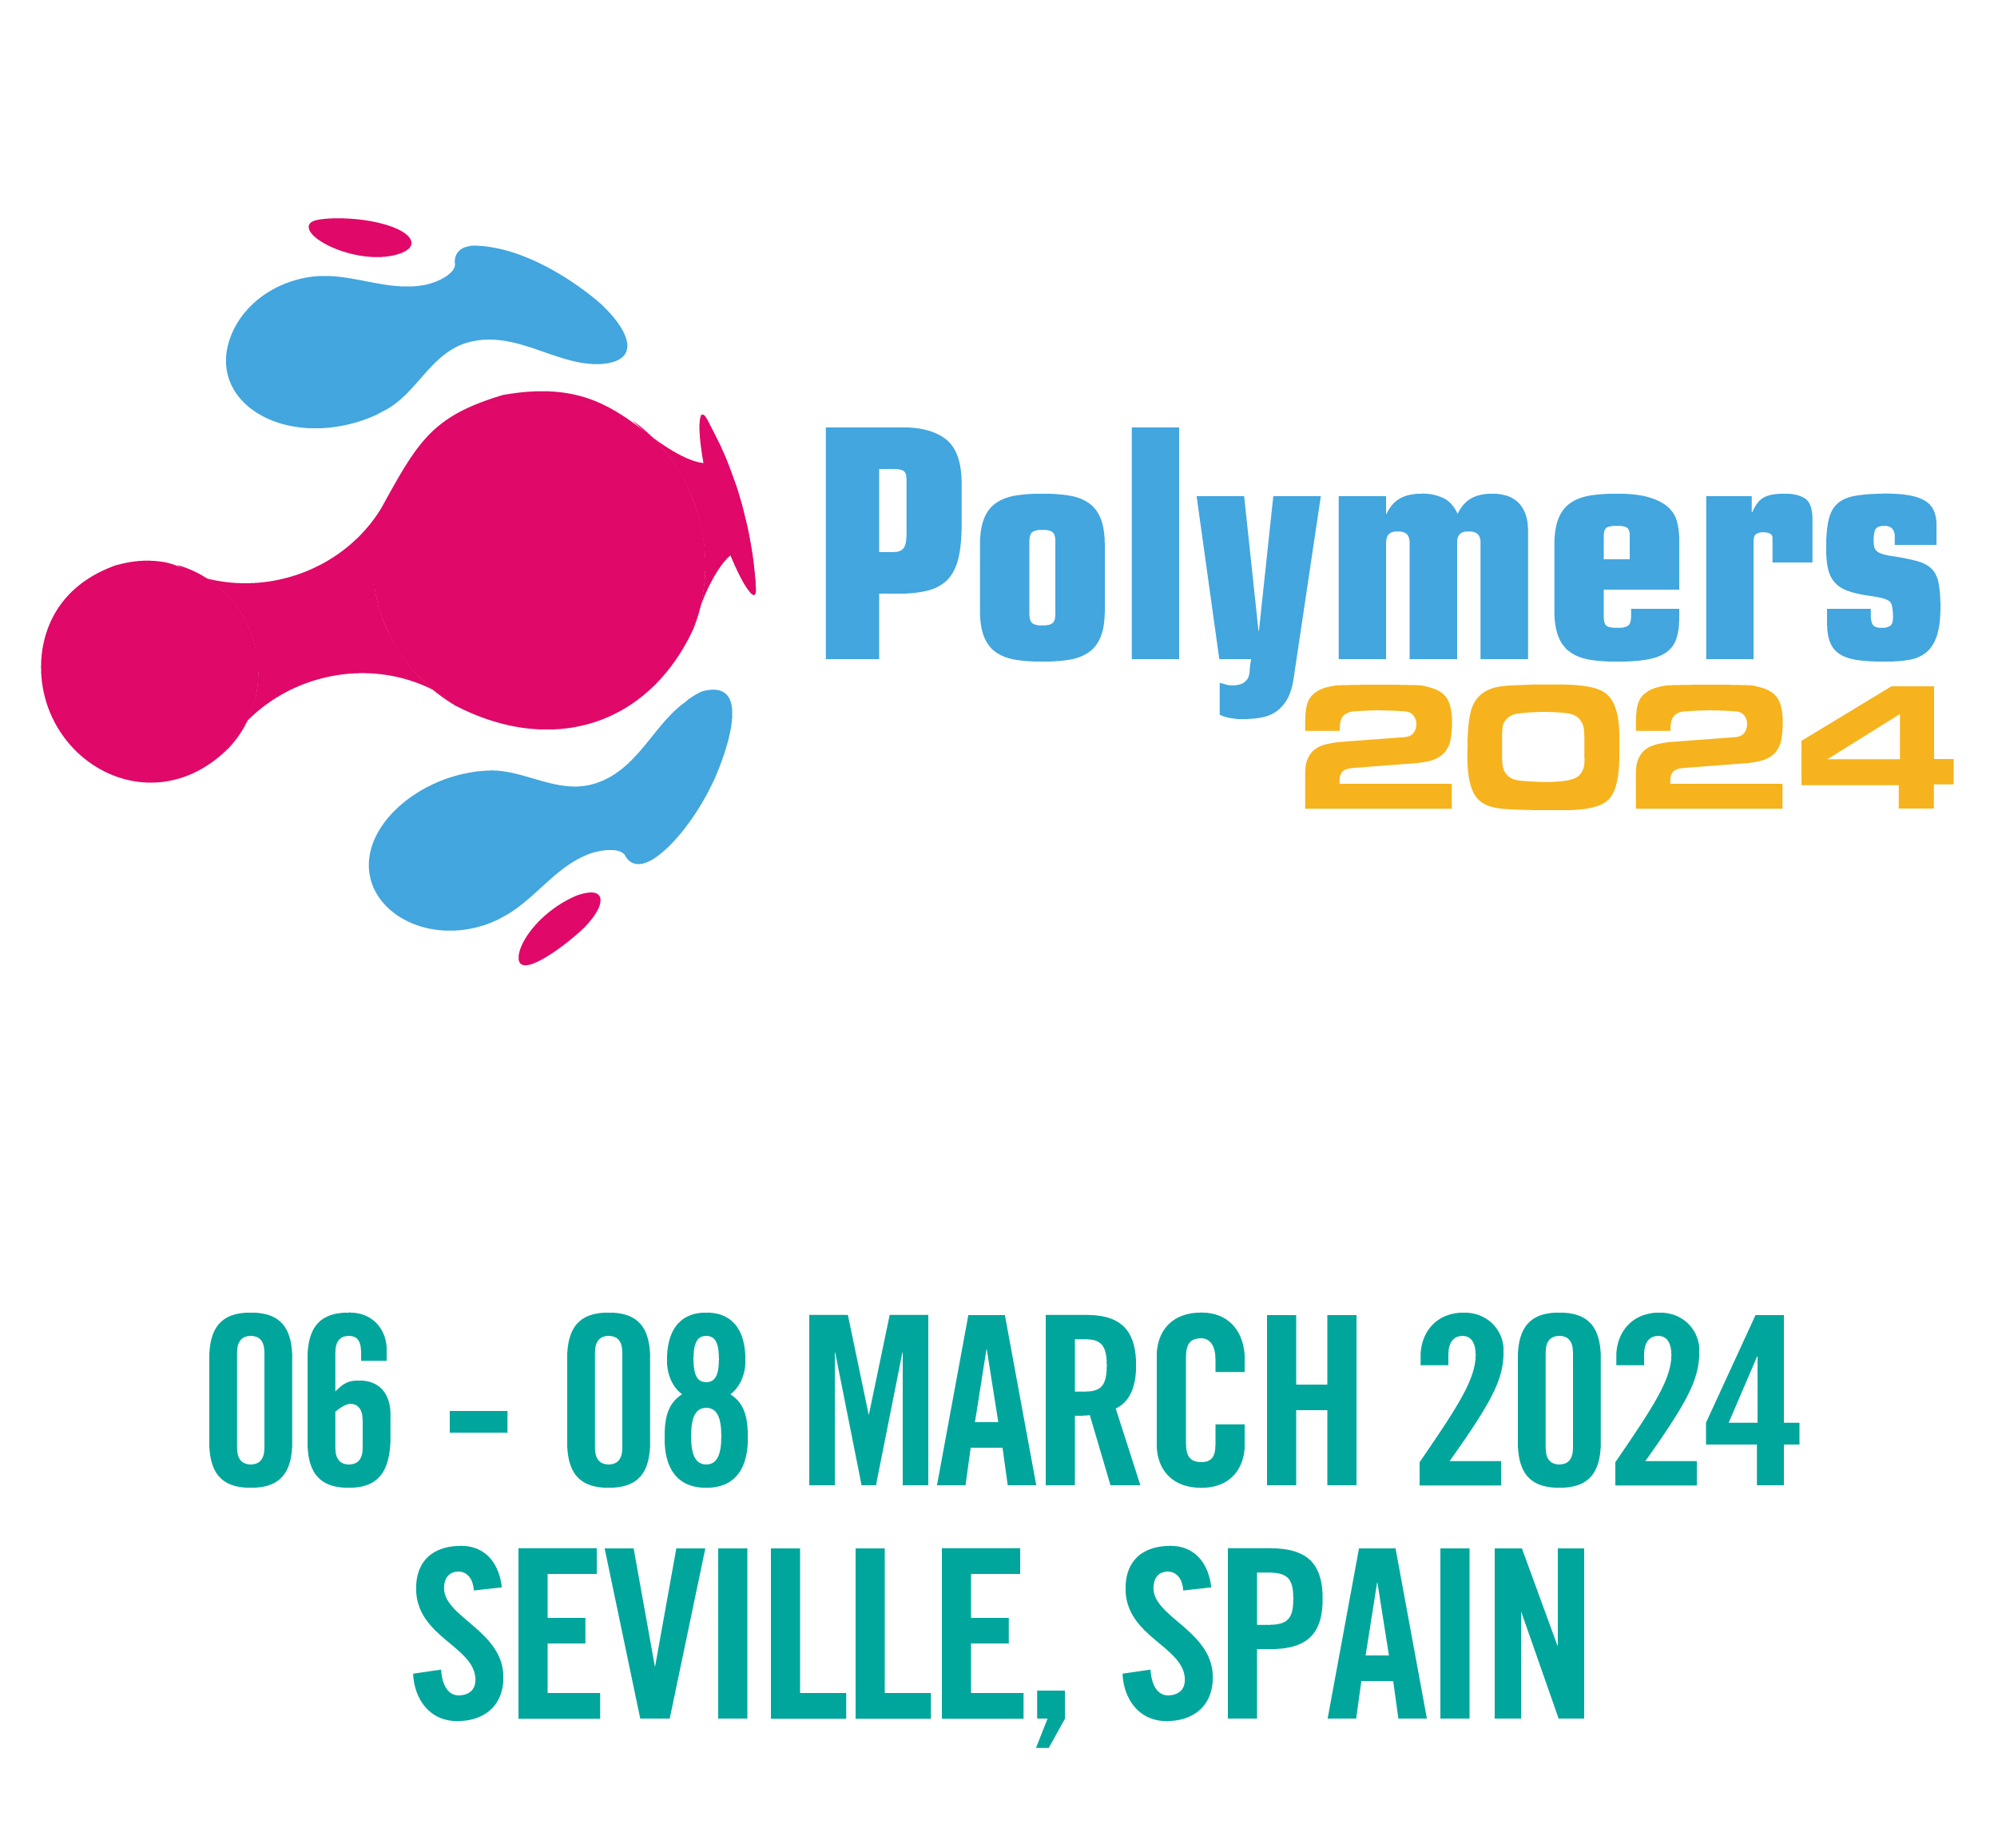 Polymers 2024 International Conference